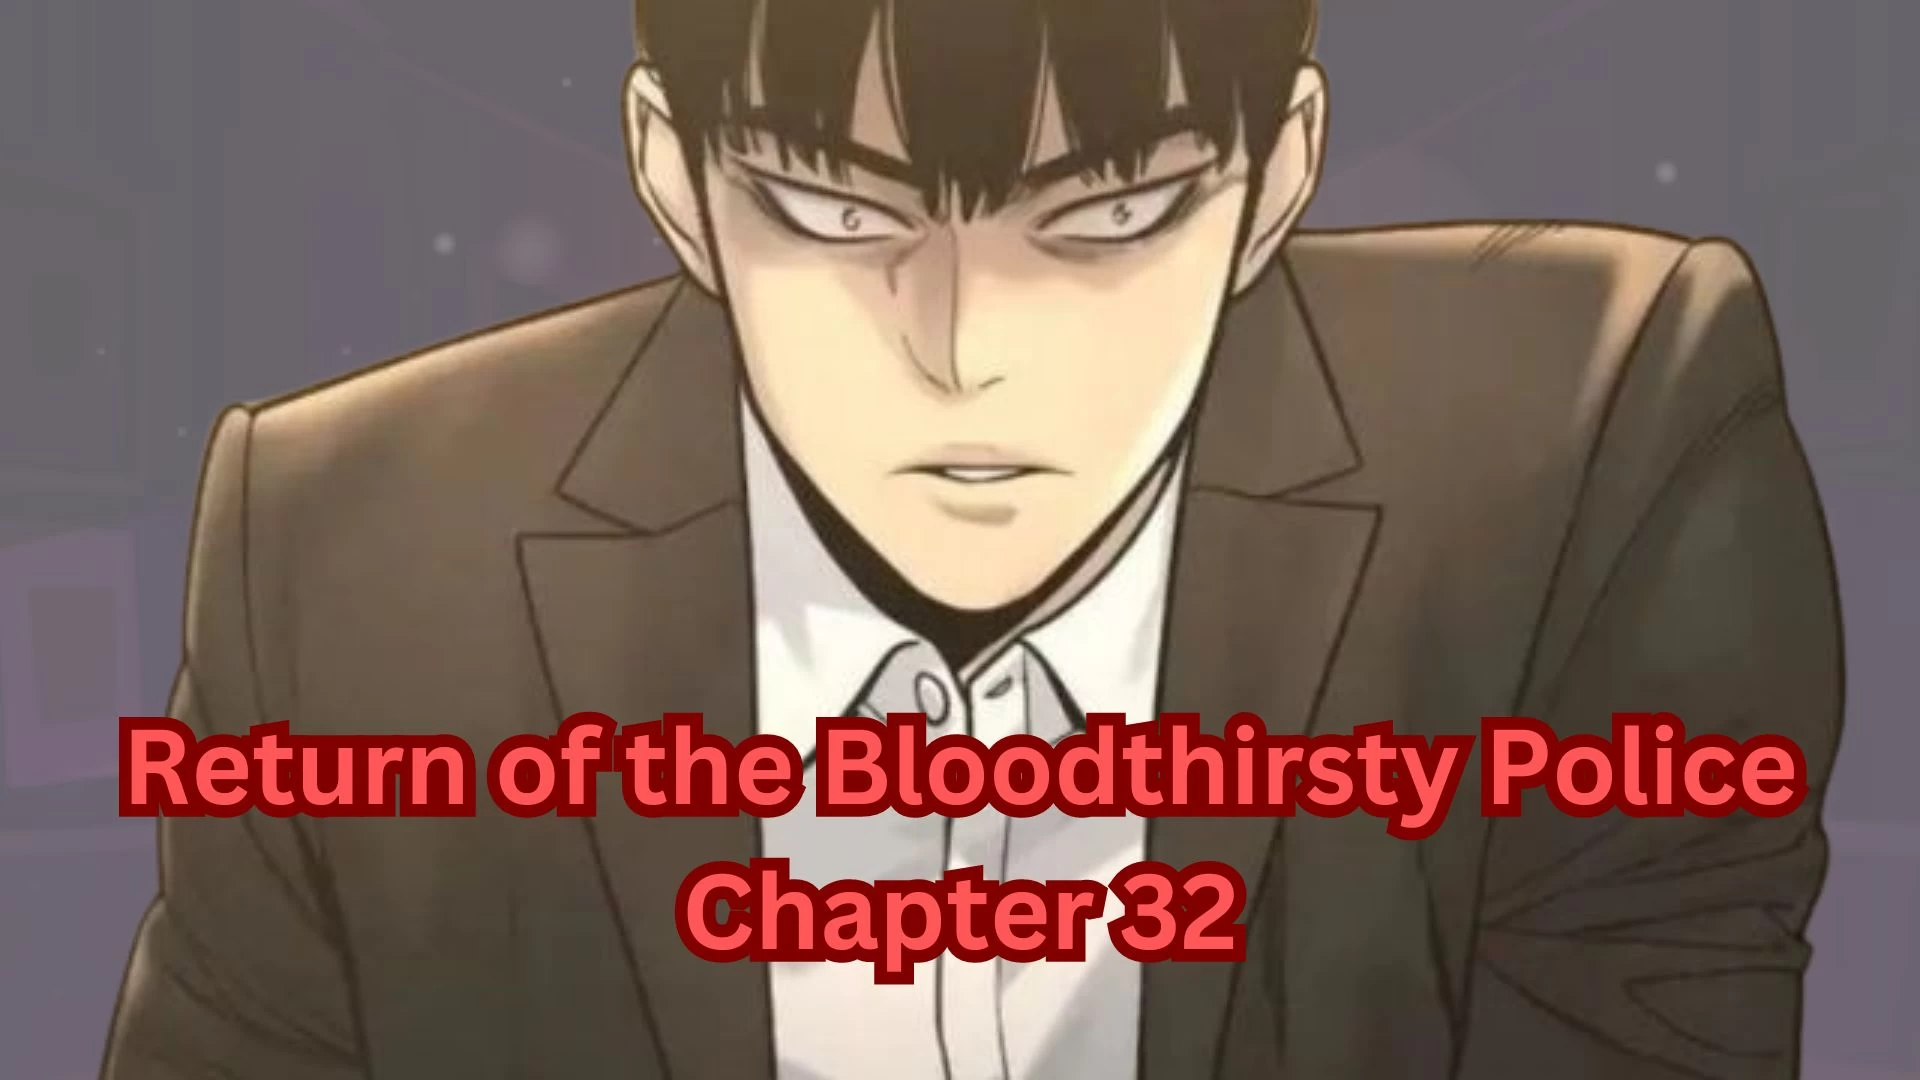 Return of the Bloodthirsty Police Chapter 32 Spoilers, Raw Scan, Release Date, and More